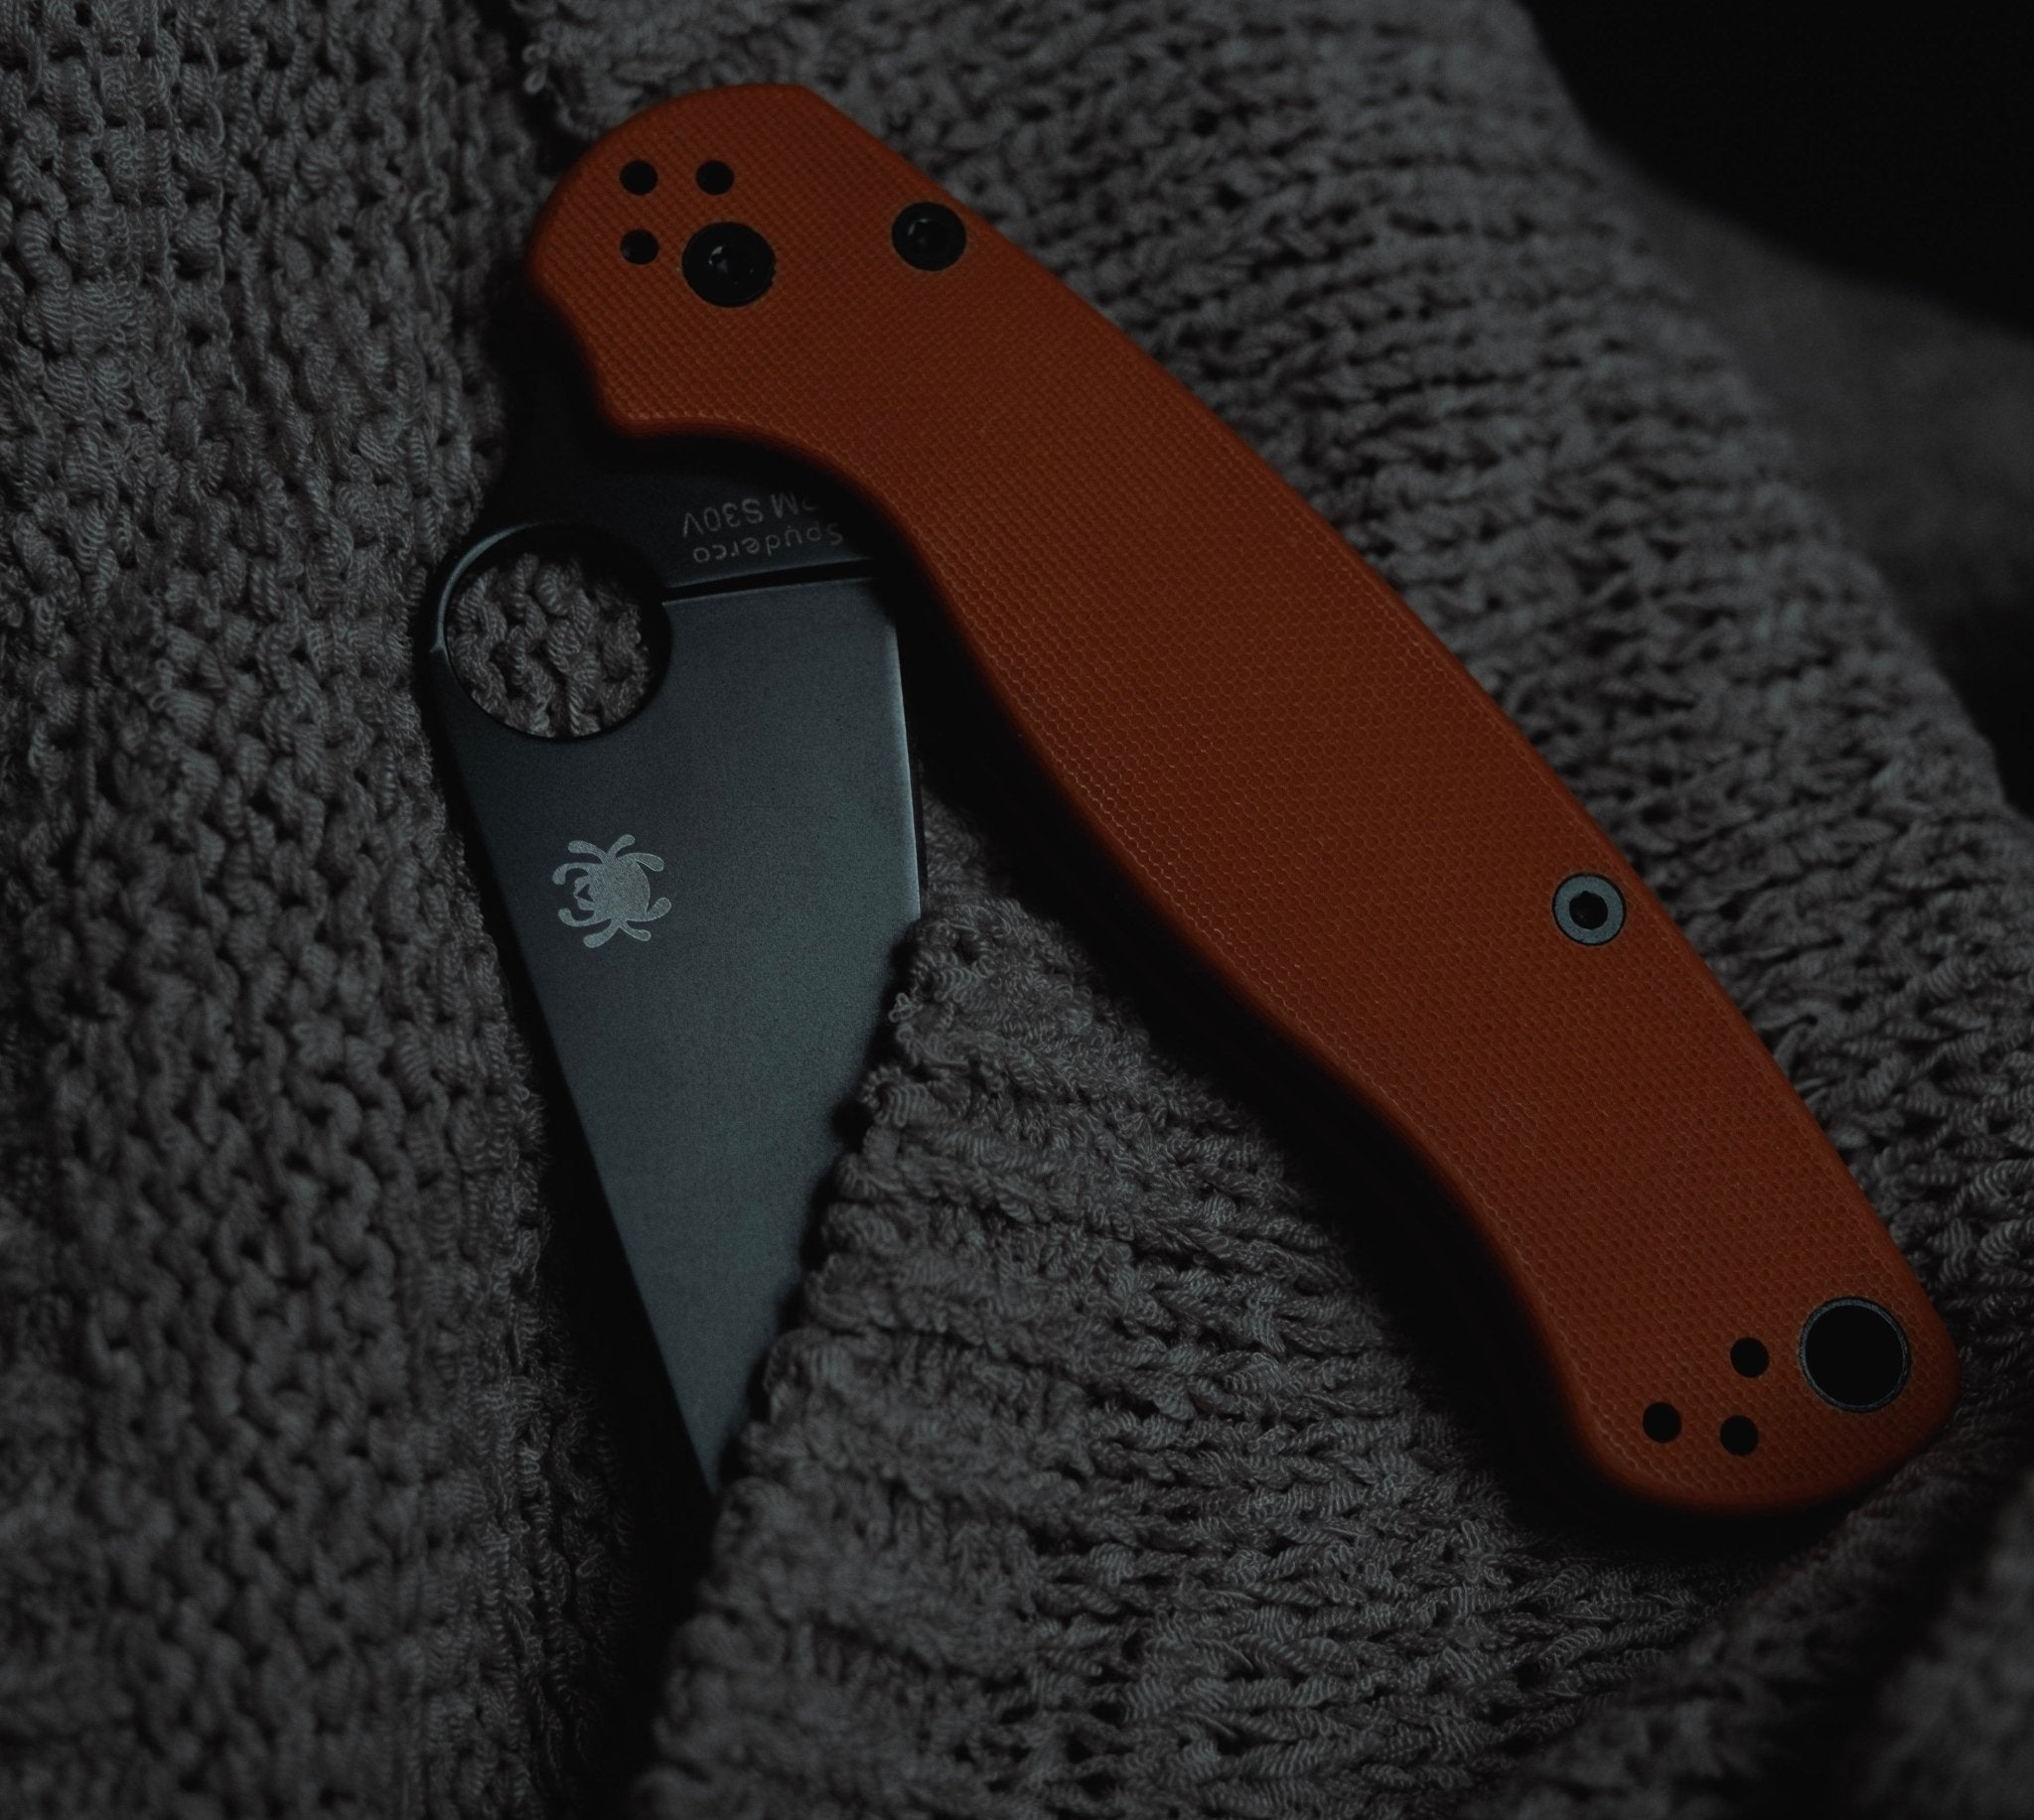 Blade Top Picks – Our Guide to Good, “Cheap” EDC Knives